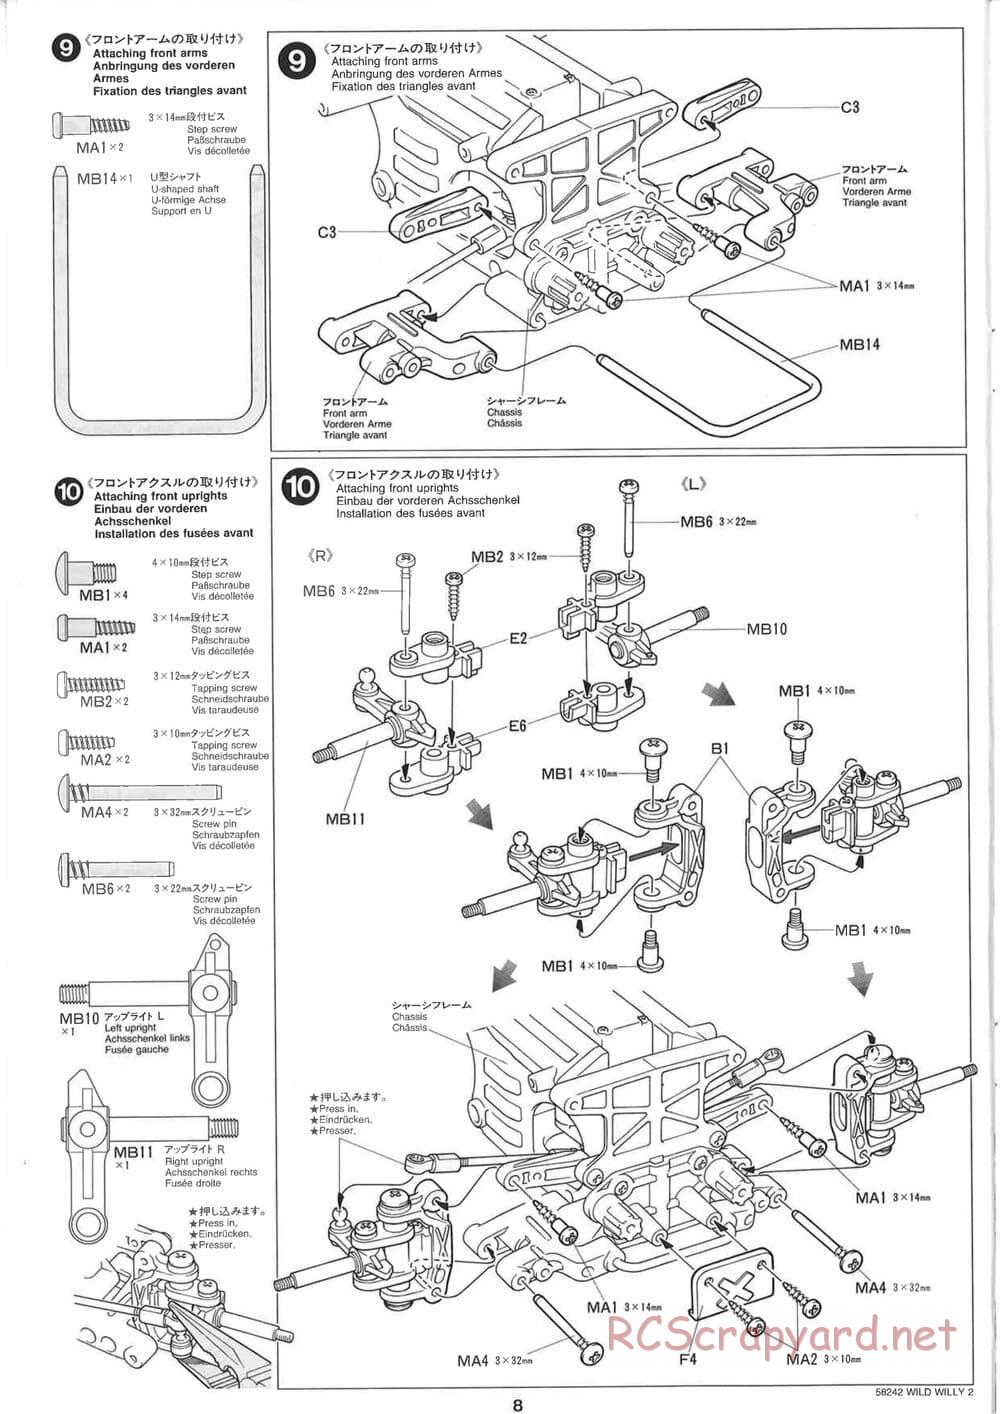 Tamiya - Wild Willy 2 - WR-02 Chassis - Manual - Page 8